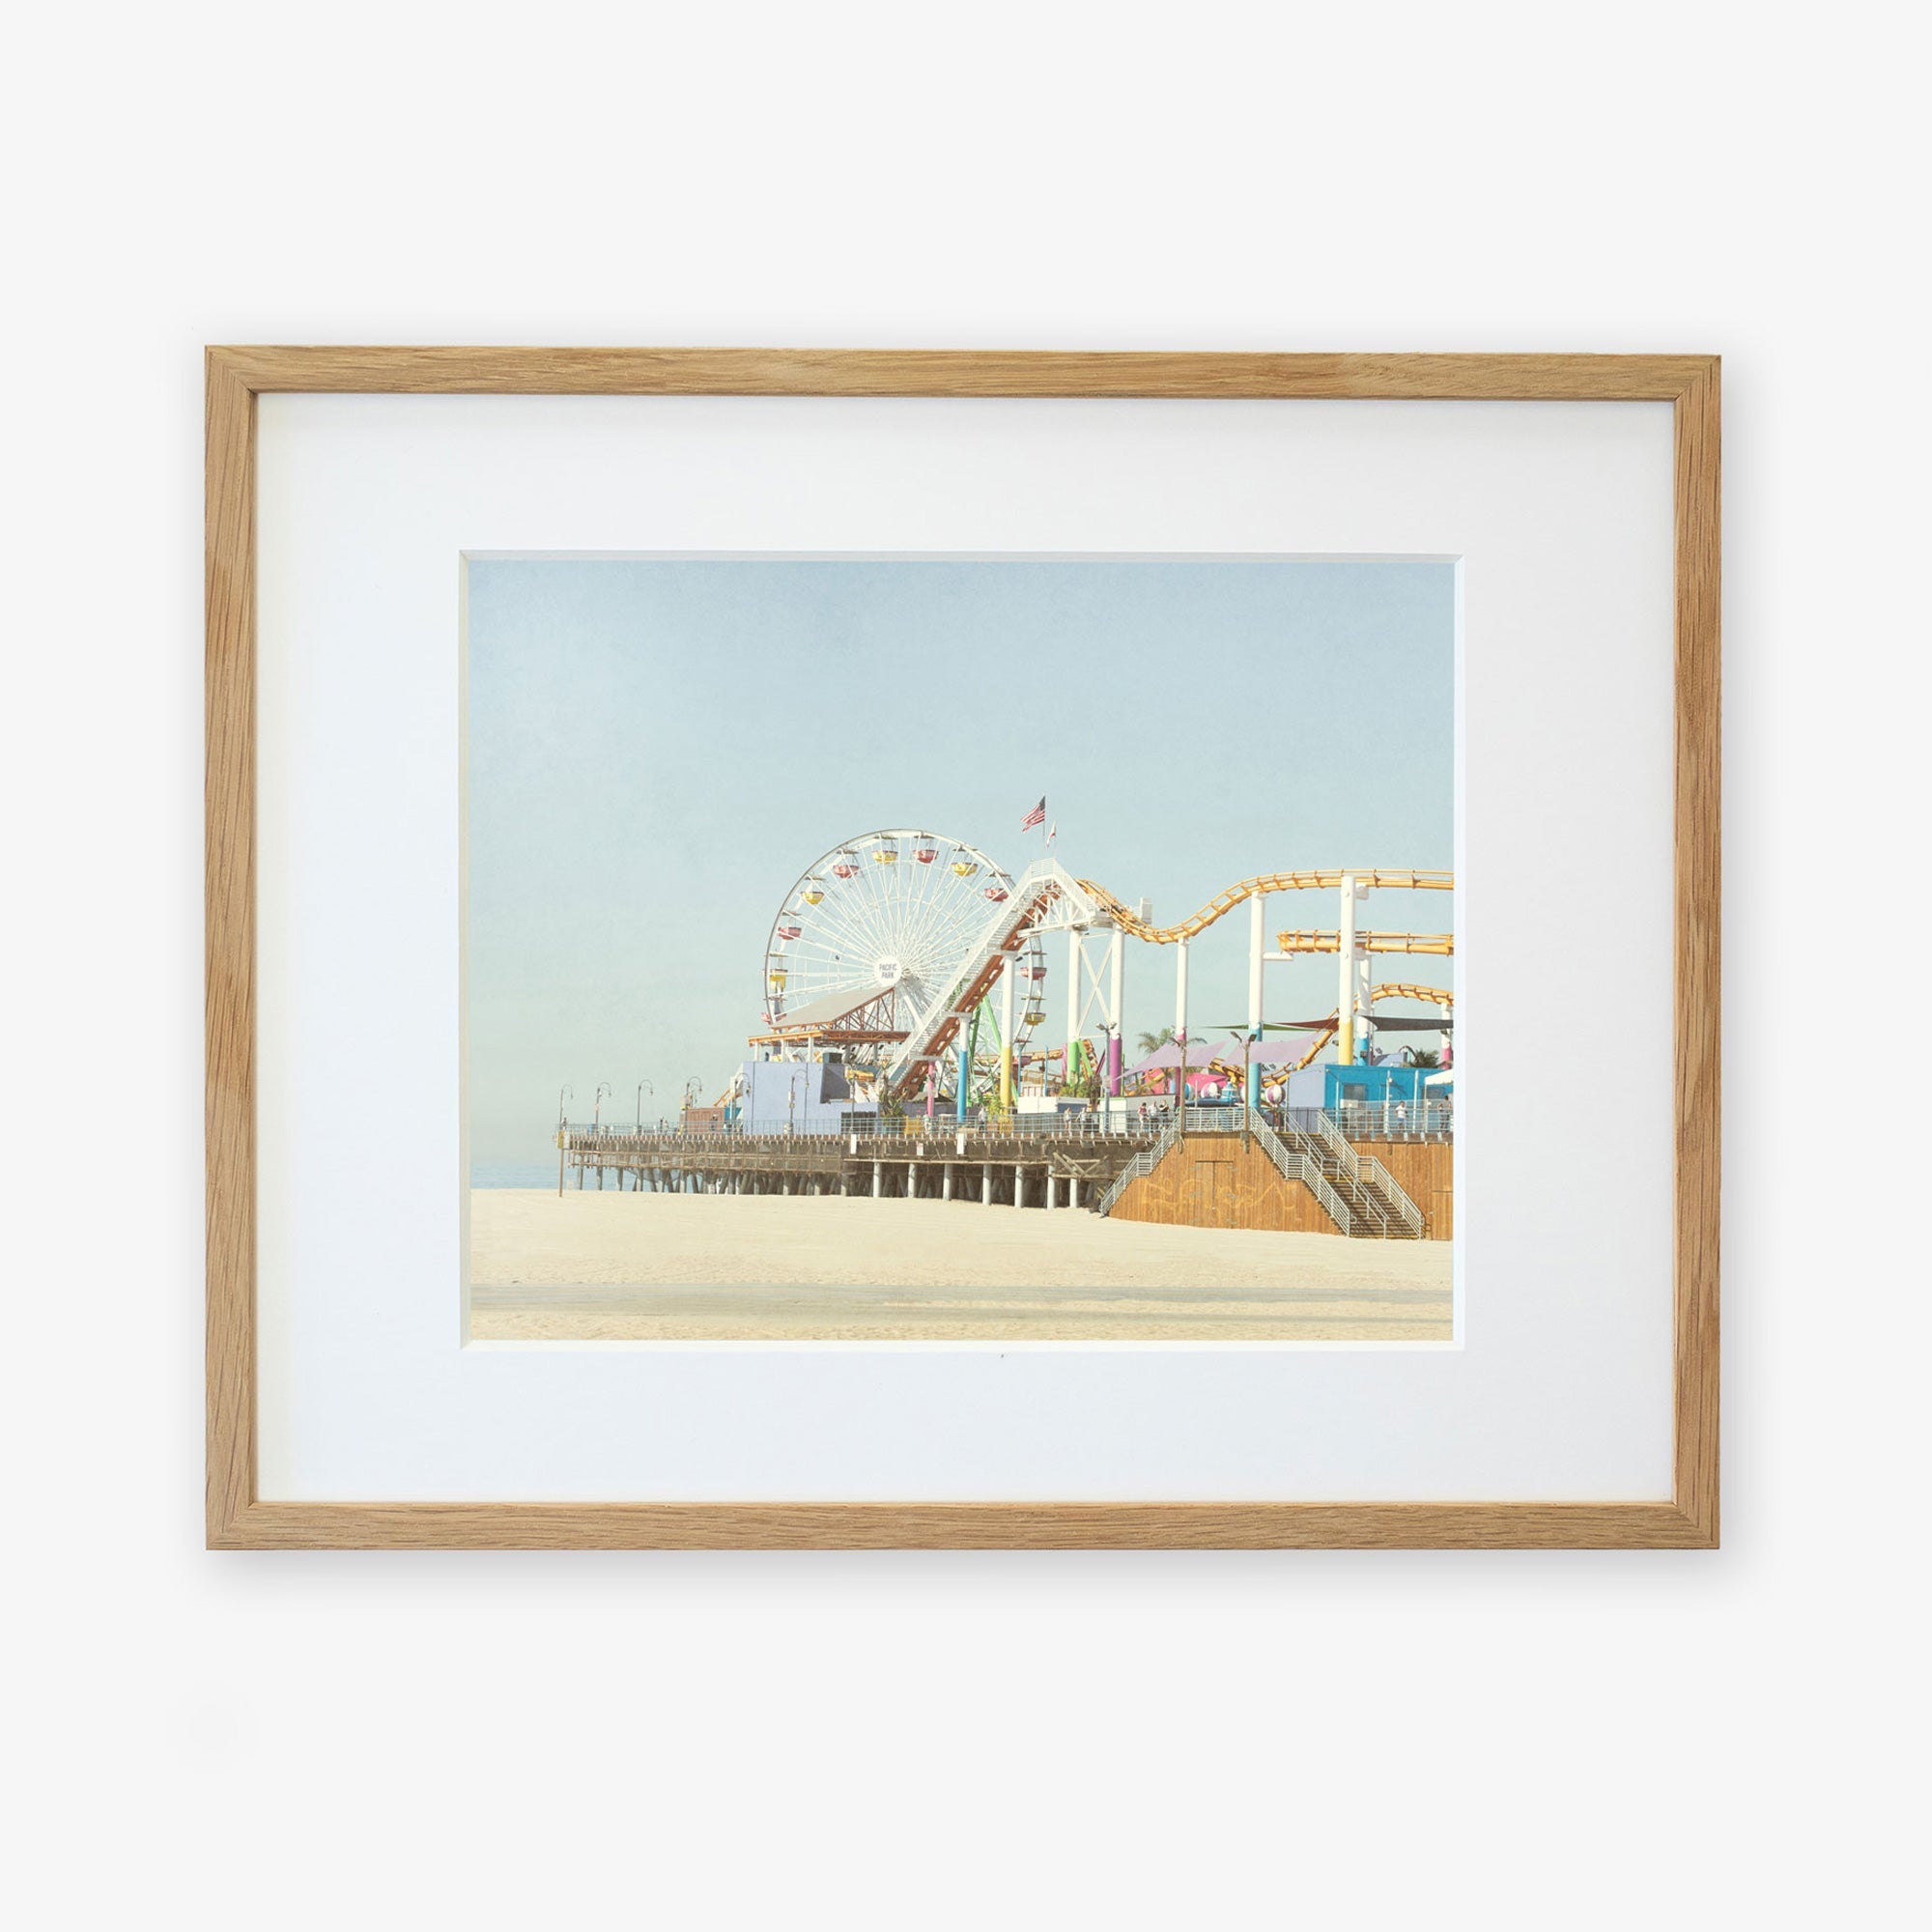 A framed illustration of a California Print, &#39;Santa Monica Pier&#39; by Offley Green, with a ferris wheel and roller coaster over Santa Monica Pier, displayed against a plain background.